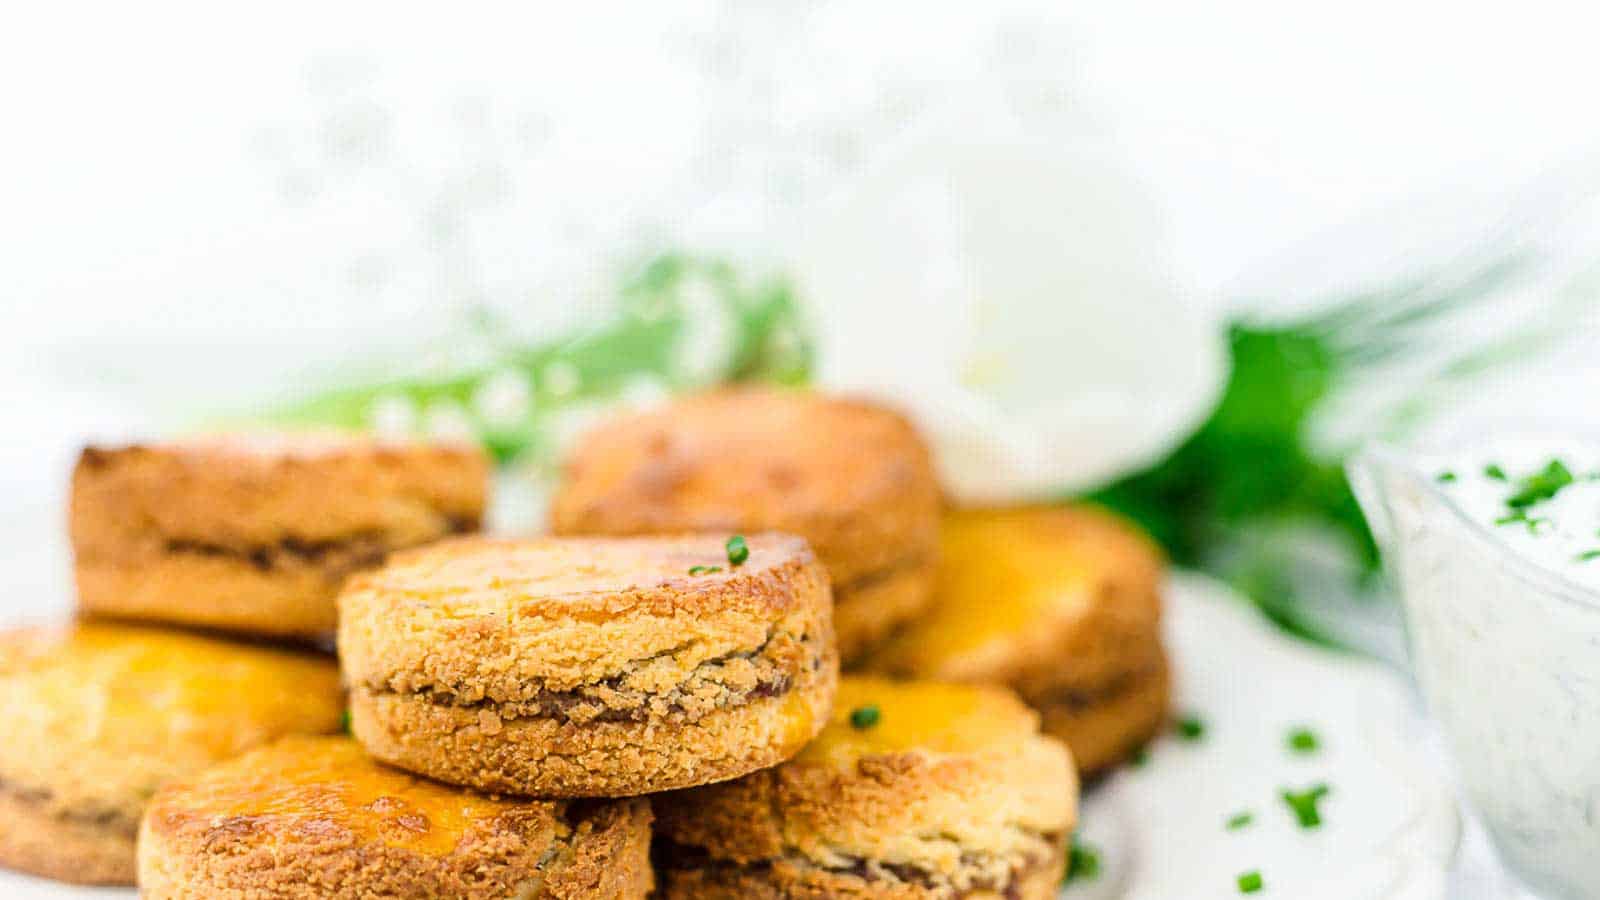 <p>Enjoy the Nutty Almond Flour Biscuits – a low-carb creation that brings comfort and taste to your snacking routine. These biscuits are made with almond flour, offering a nutty flavor and a satisfying texture. Whether you’re dipping them or enjoying them as a base for savory toppings, these biscuits are a delightful treat that’s low in carbs.</p><p><strong>Get the Recipe: </strong><a href="https://www.lowcarb-nocarb.com/low-carb-biscuits/?utm_source=msn&utm_medium=page&utm_campaign=msn">Nutty Almond Flour Biscuits</a></p>